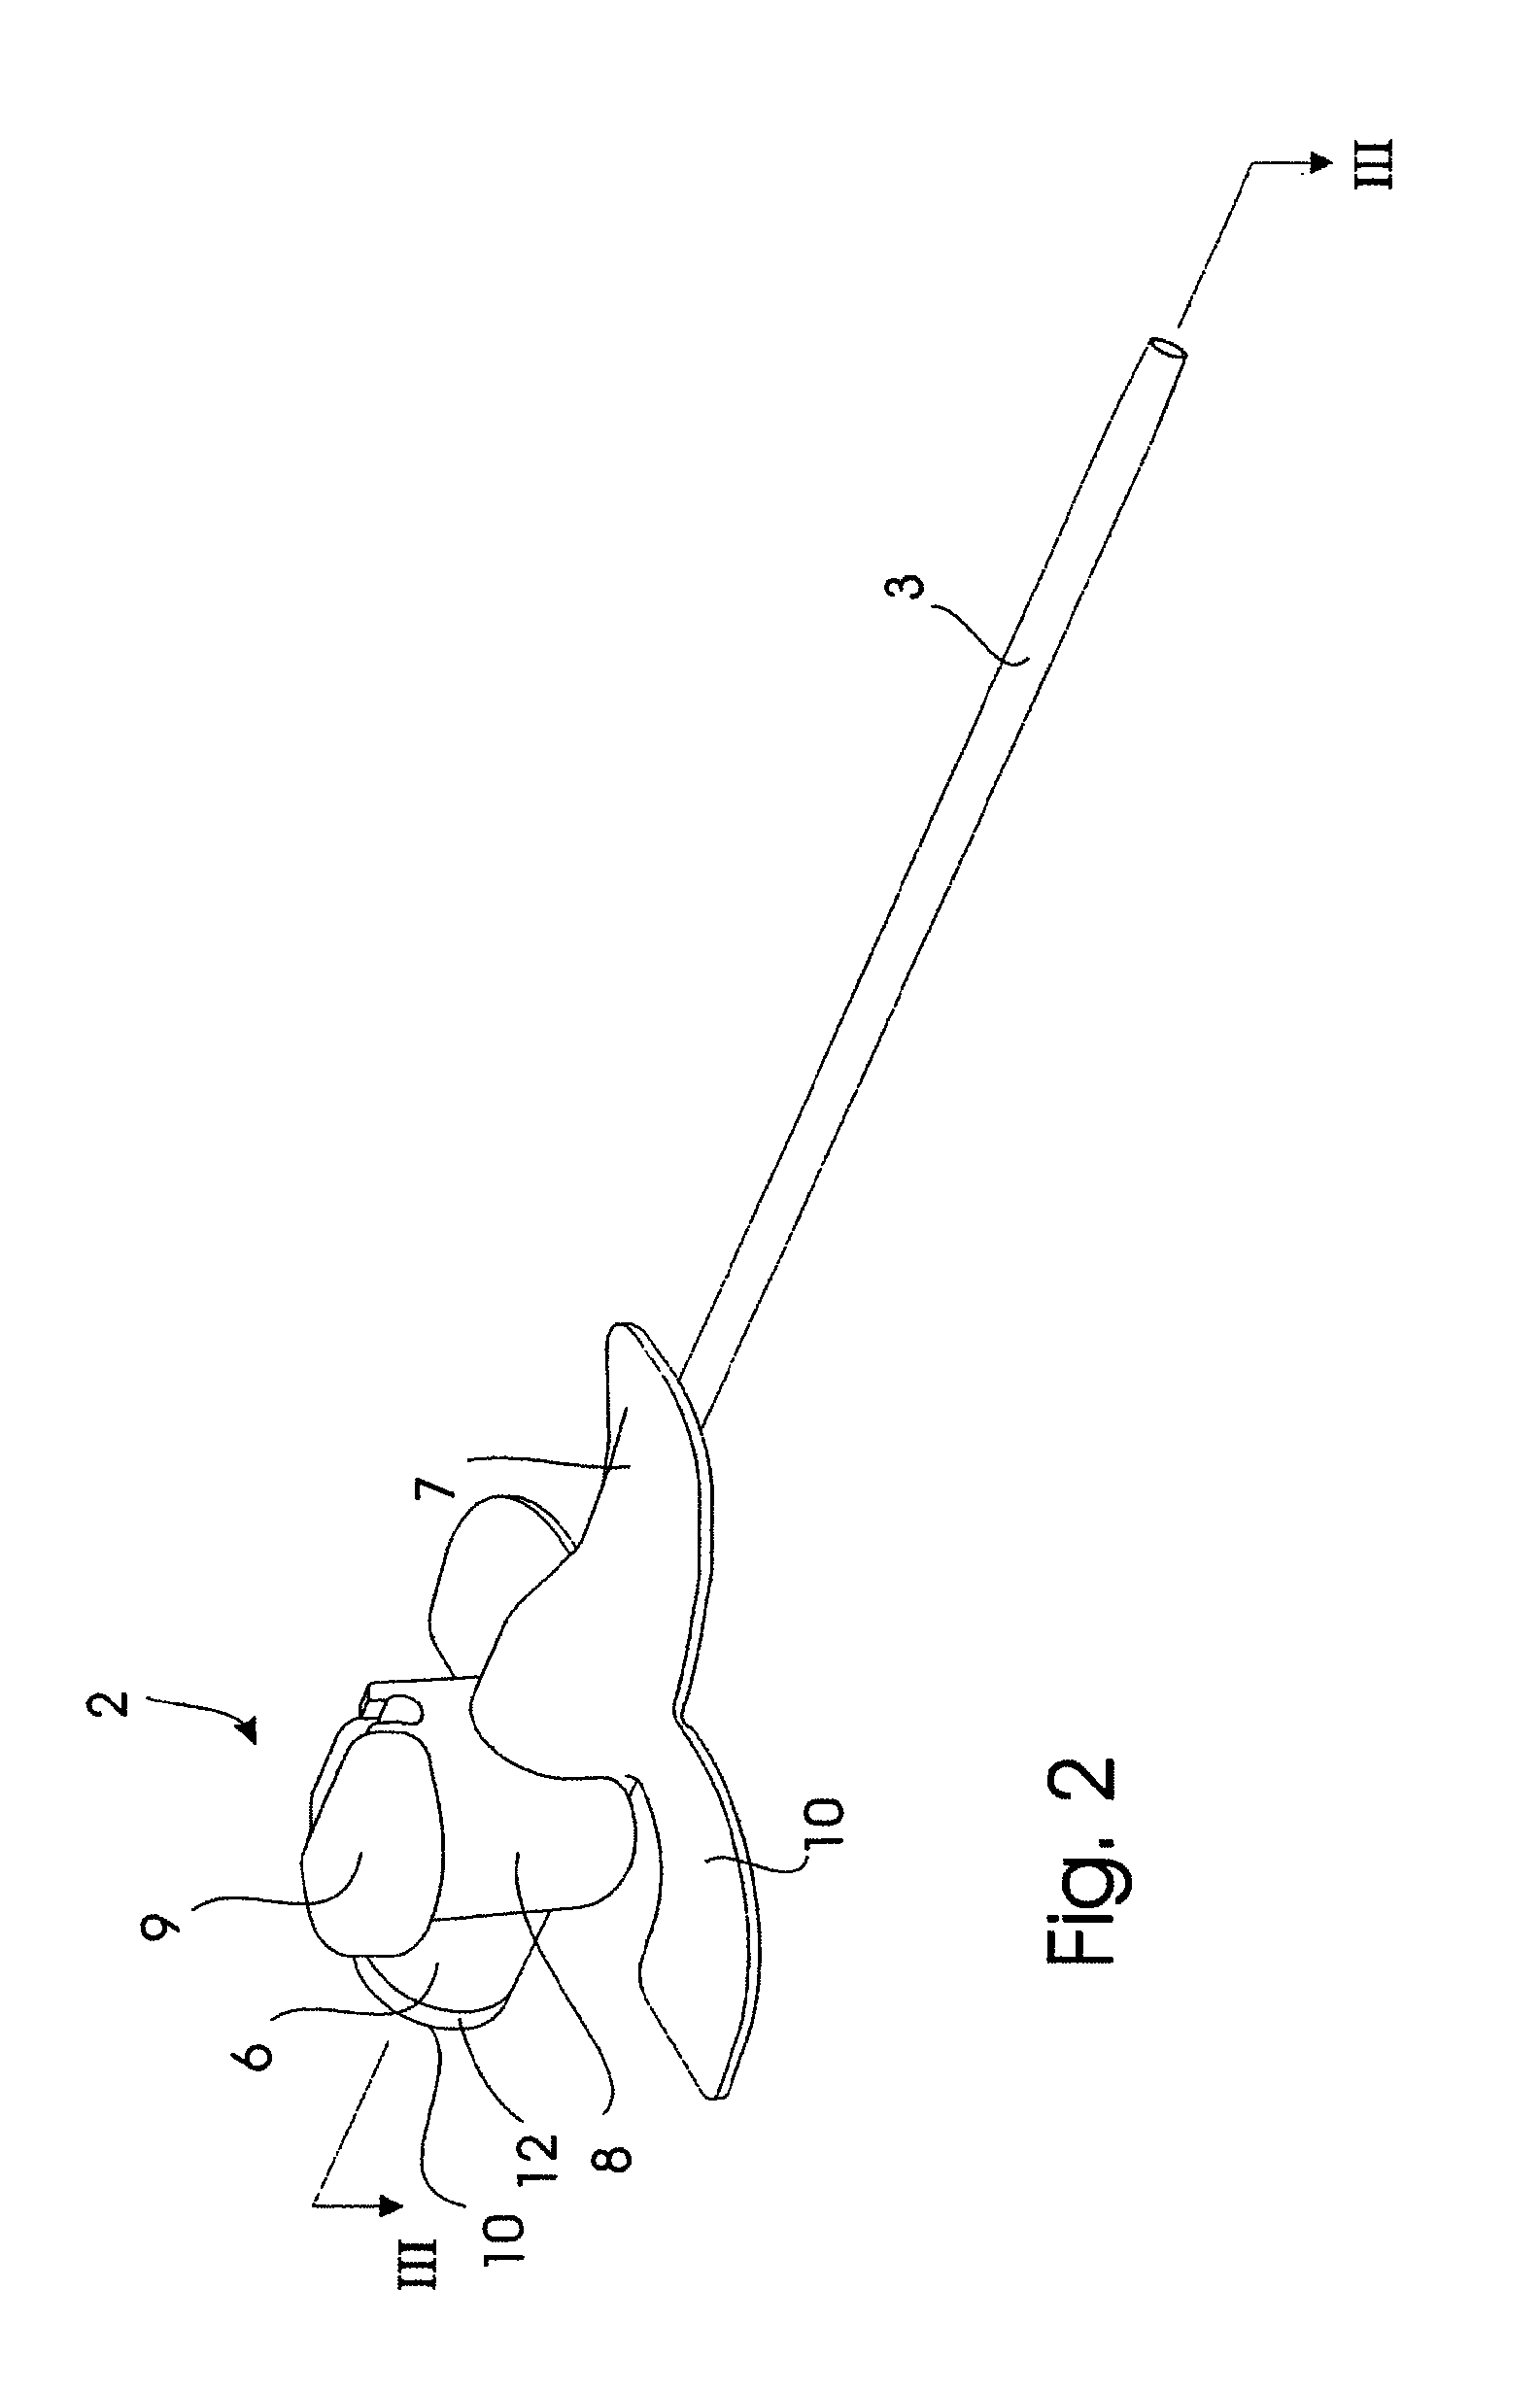 Peripheral catheter assembly and method of using it